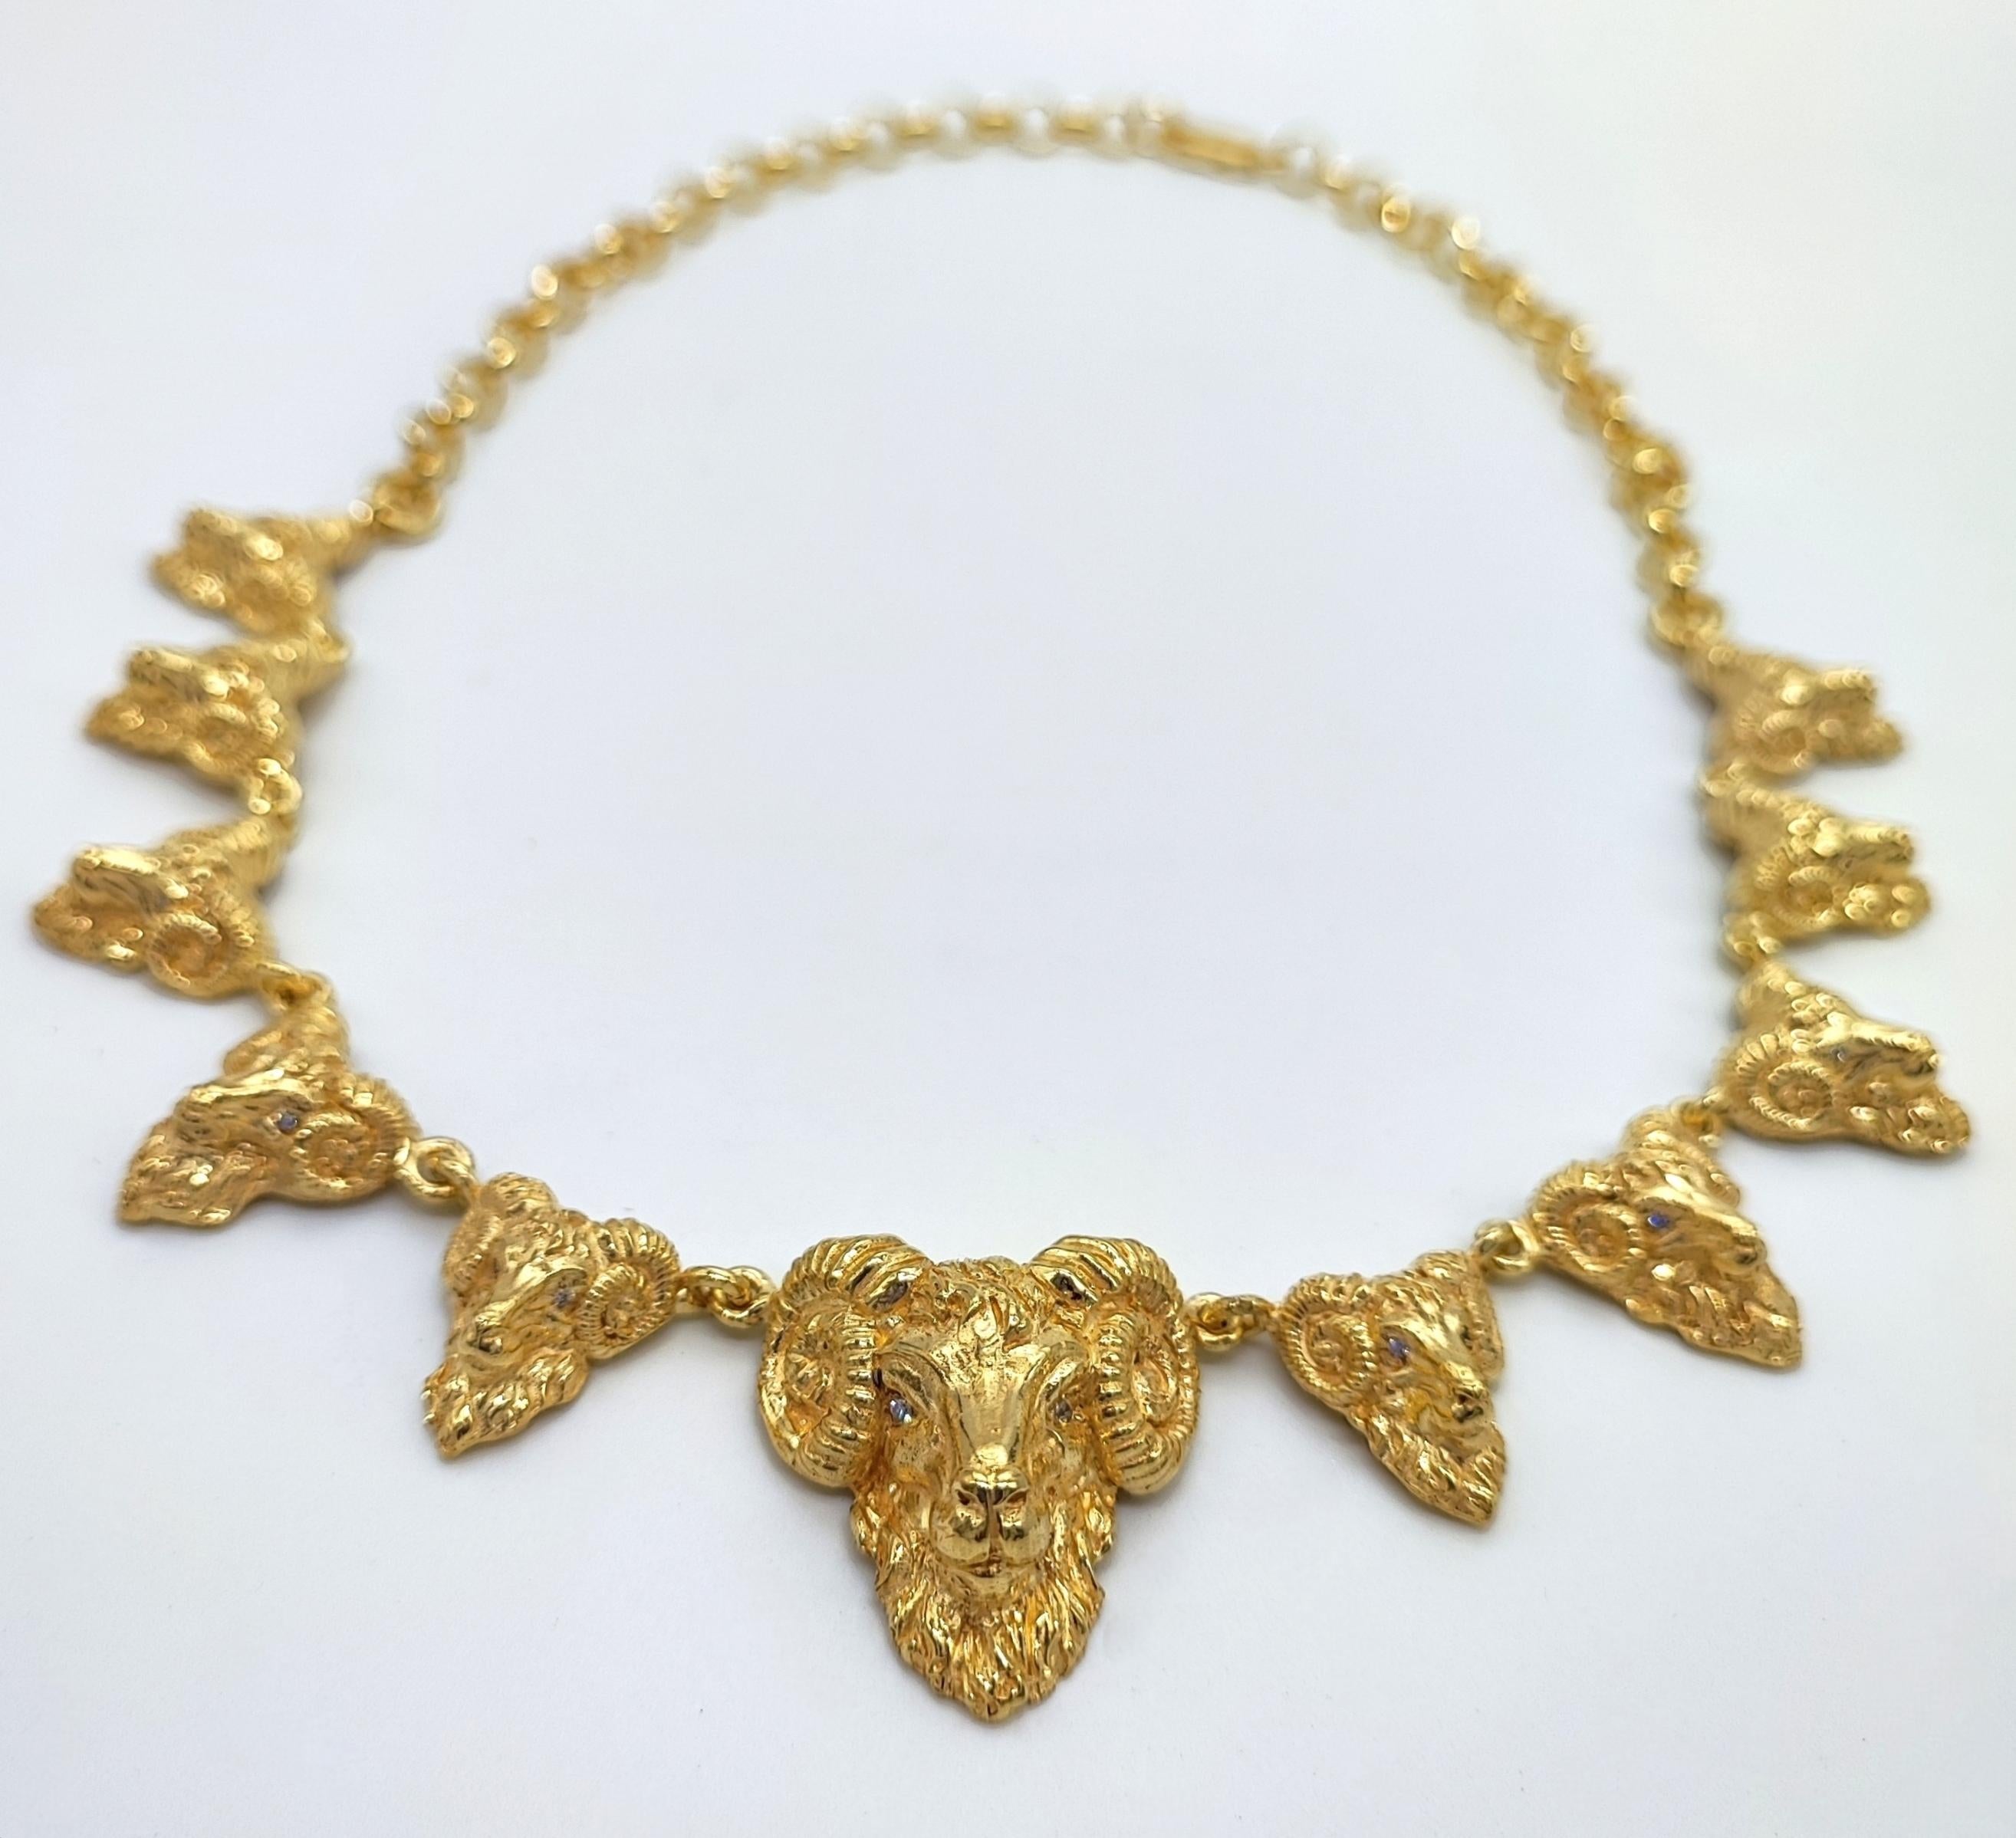 Animalia Series
Important 14 kt solid yellow gold choker necklace.
Necklace created entirely by hand by Italian artisans. 
The technique is that of lost-wax microsculpture. 
Aries' eyes are set with diamonds totaling 22 stones.
The necklace is